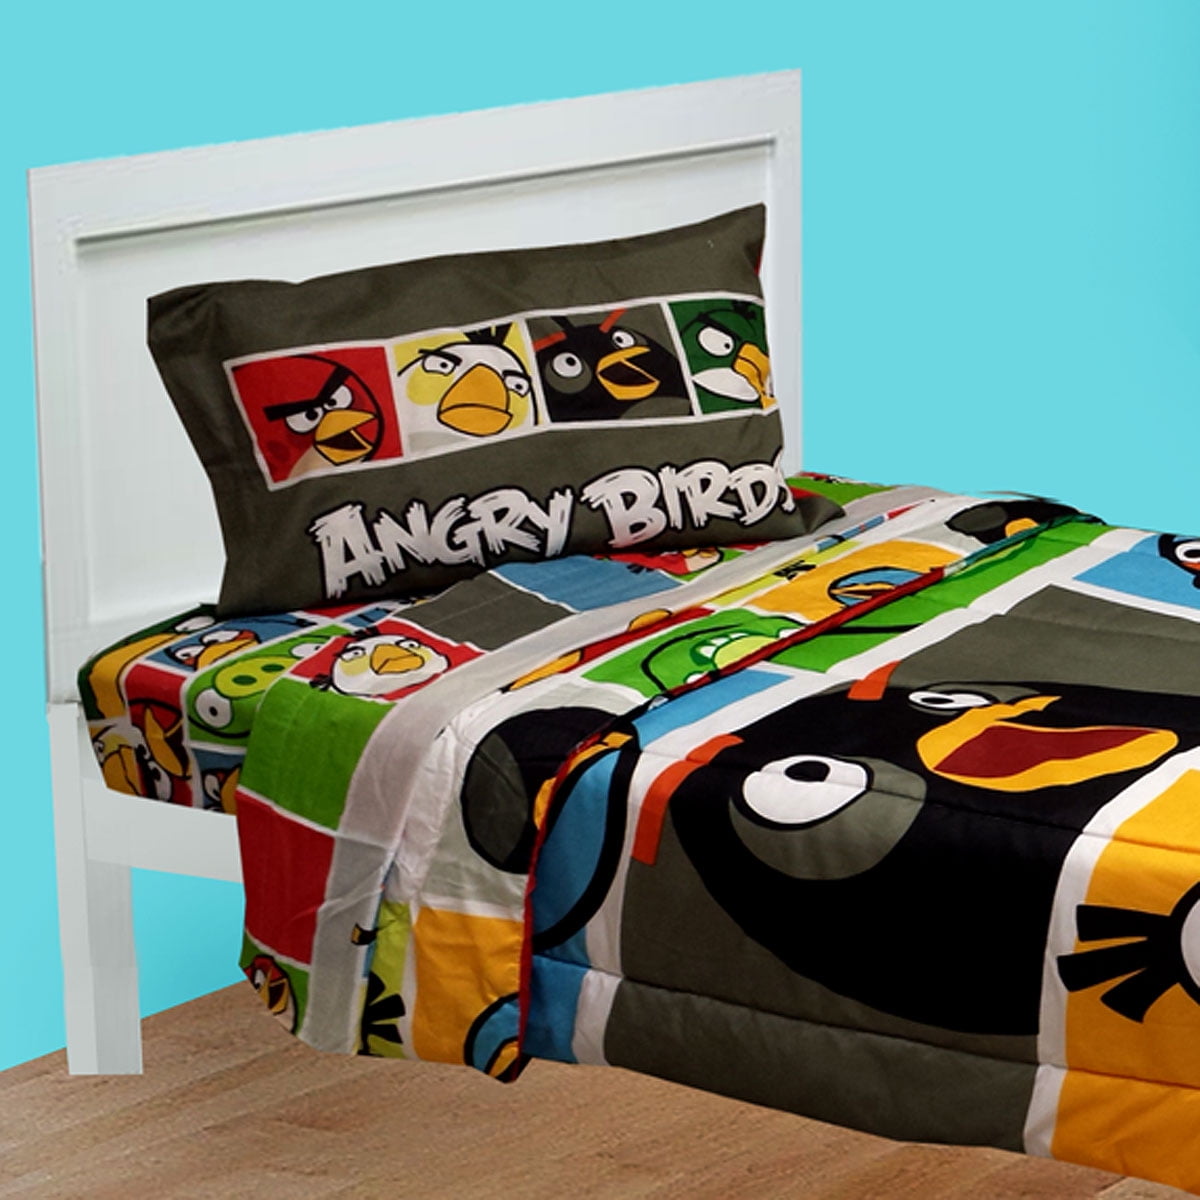 *NEW* ANGRY BIRDS 4PC TWIN/SINGLE BEDDING SET DUVET COVER,2 SHEETS,PILLOW,COTTON 